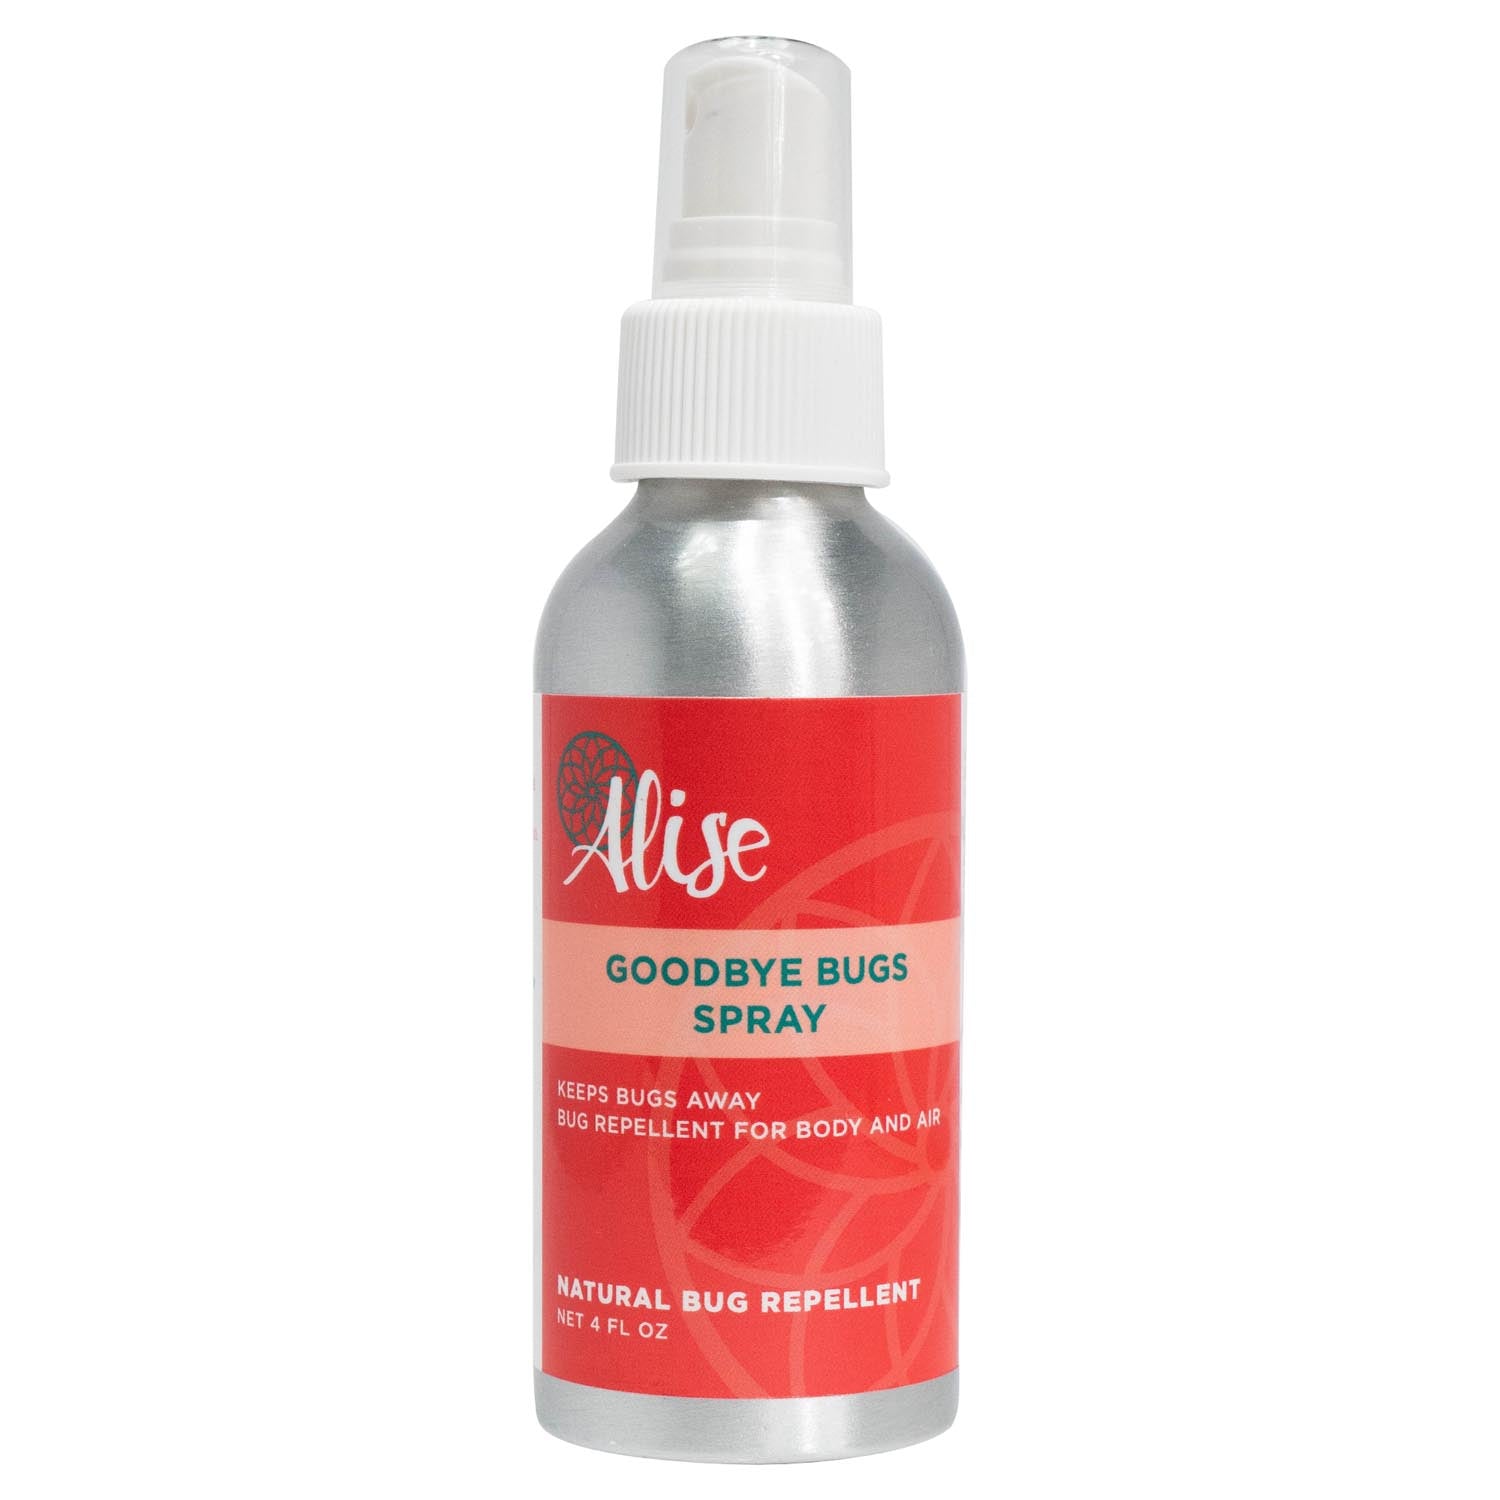 Goodbye Bugs Spray 4oz handcrafted by Alise Body Care